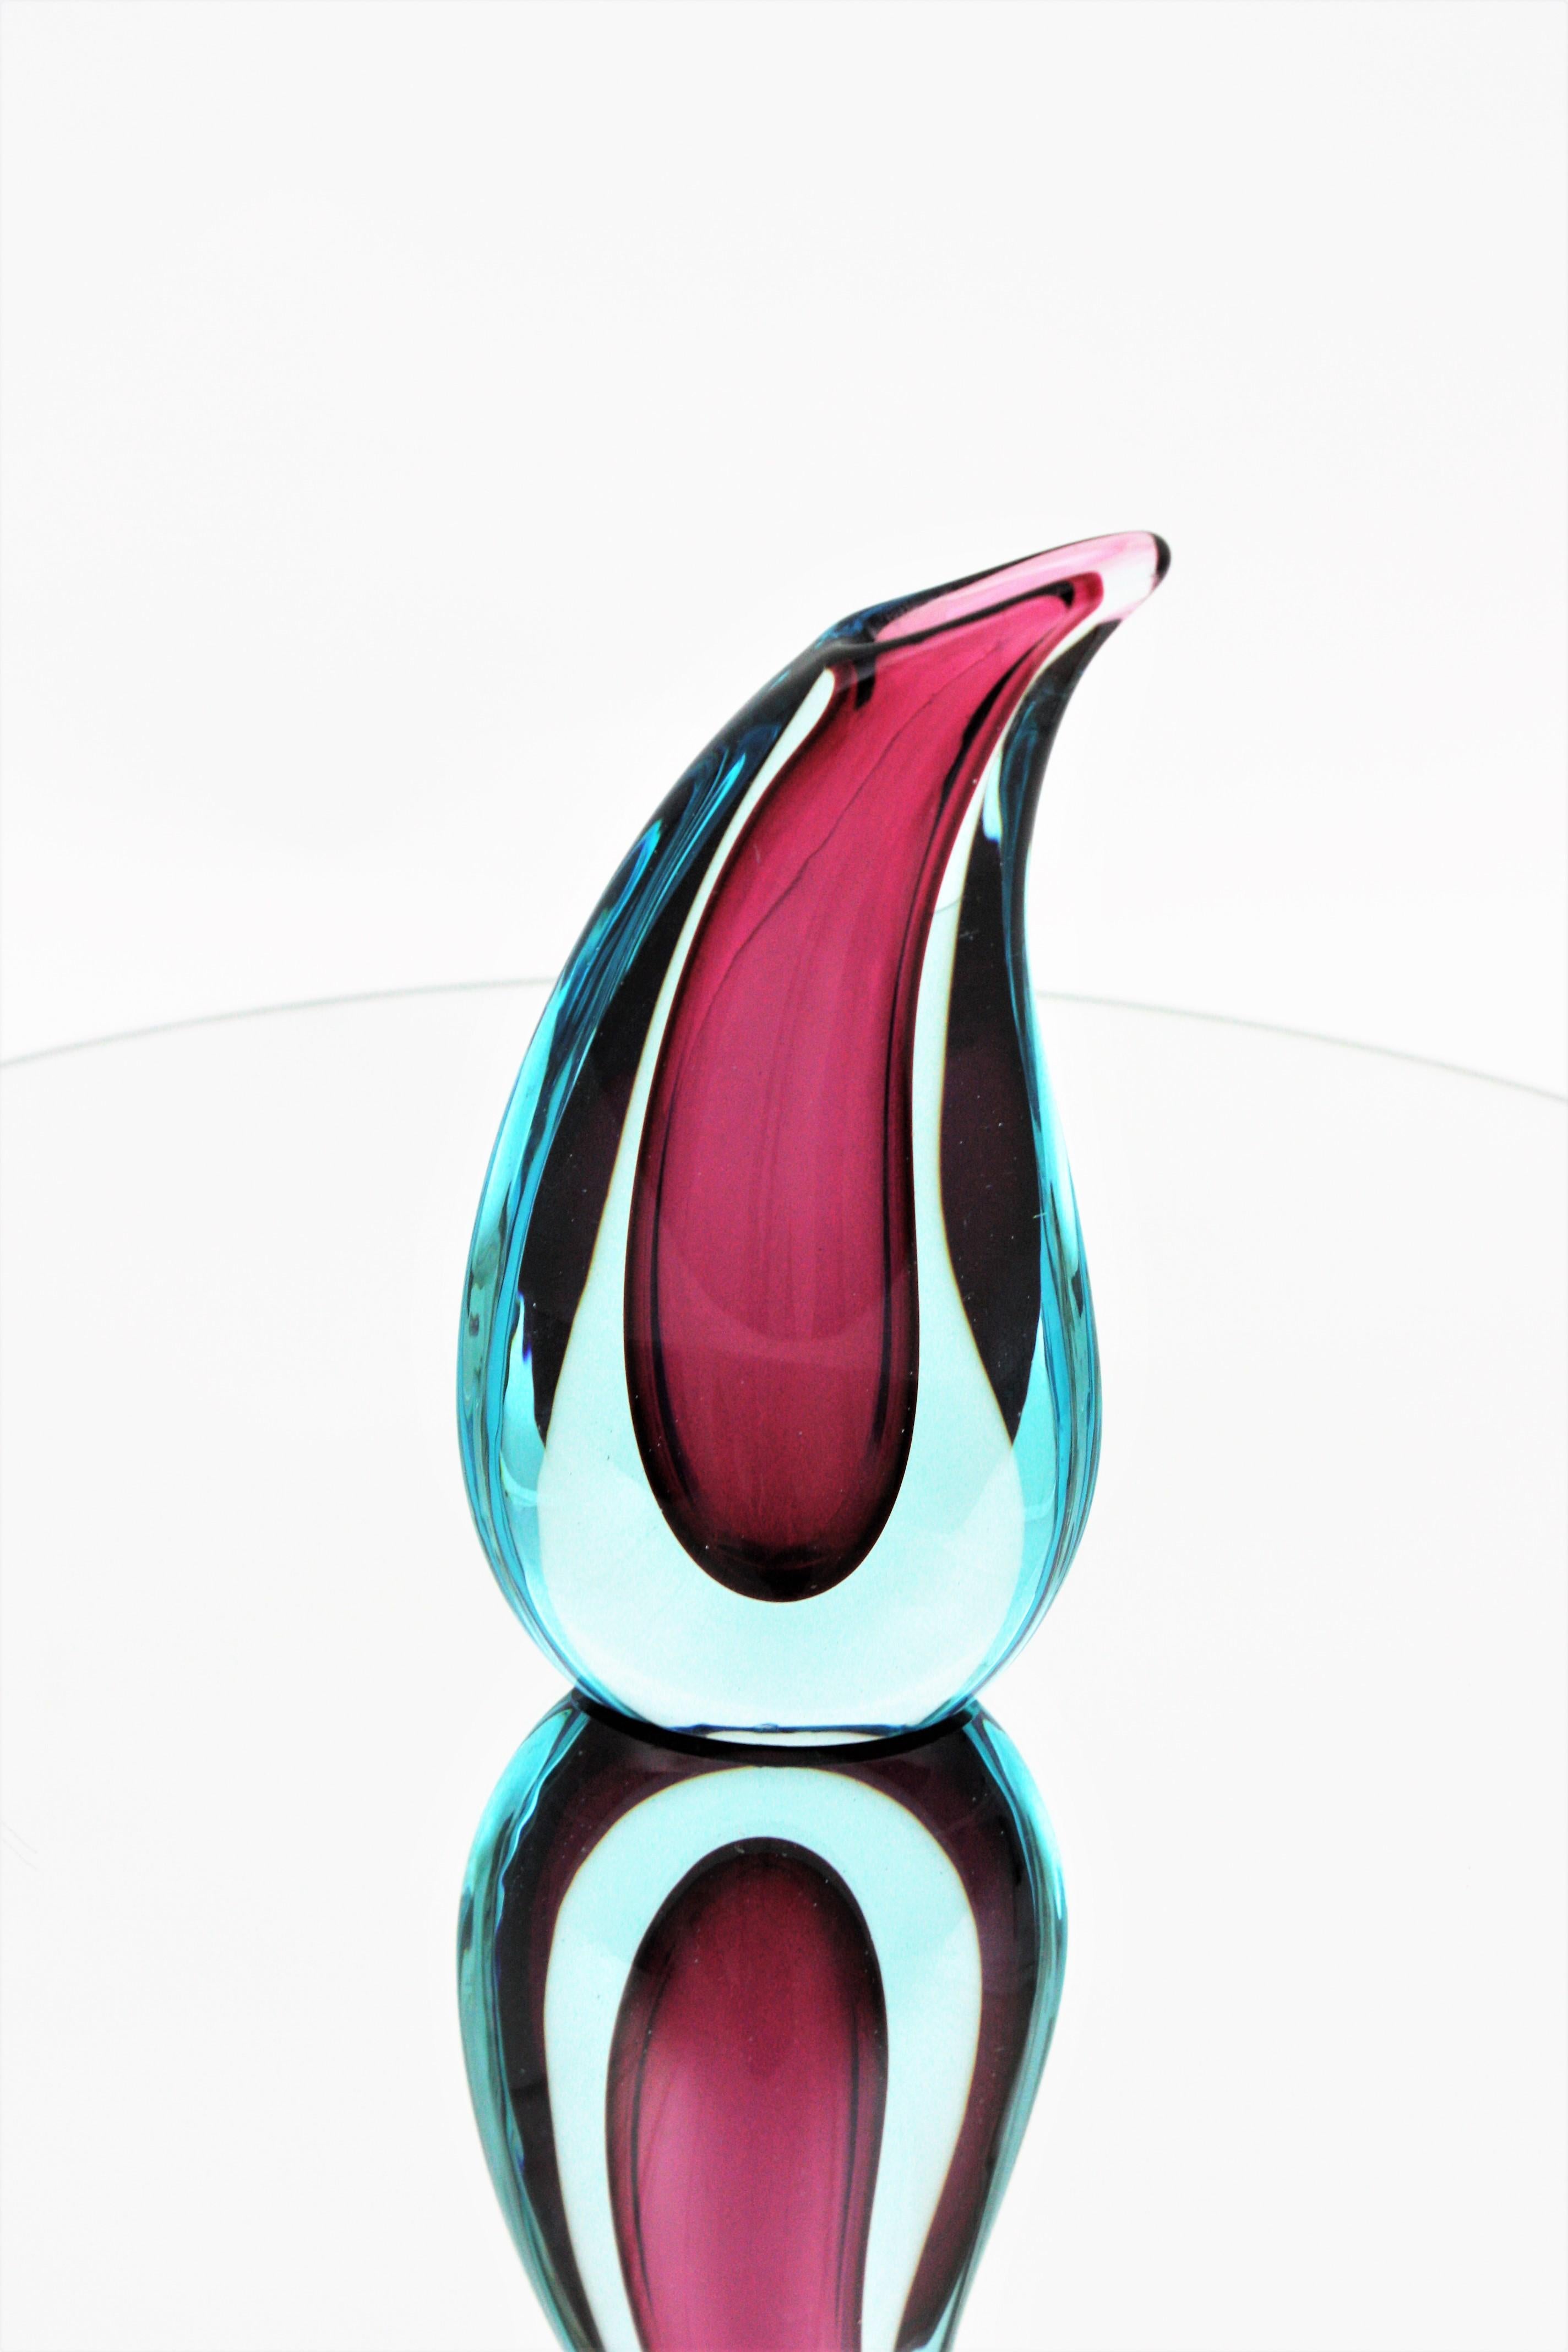 A wonderful blue and purple hand blown Murano glass vase. Designed by Flavio Poli and manufactured by Seguso Vetri d'Arte. Italy, 1950s.
Amazing teardrop shape and eye-catching colors.
Lovely to be used as flower vase or decorative vase. To be